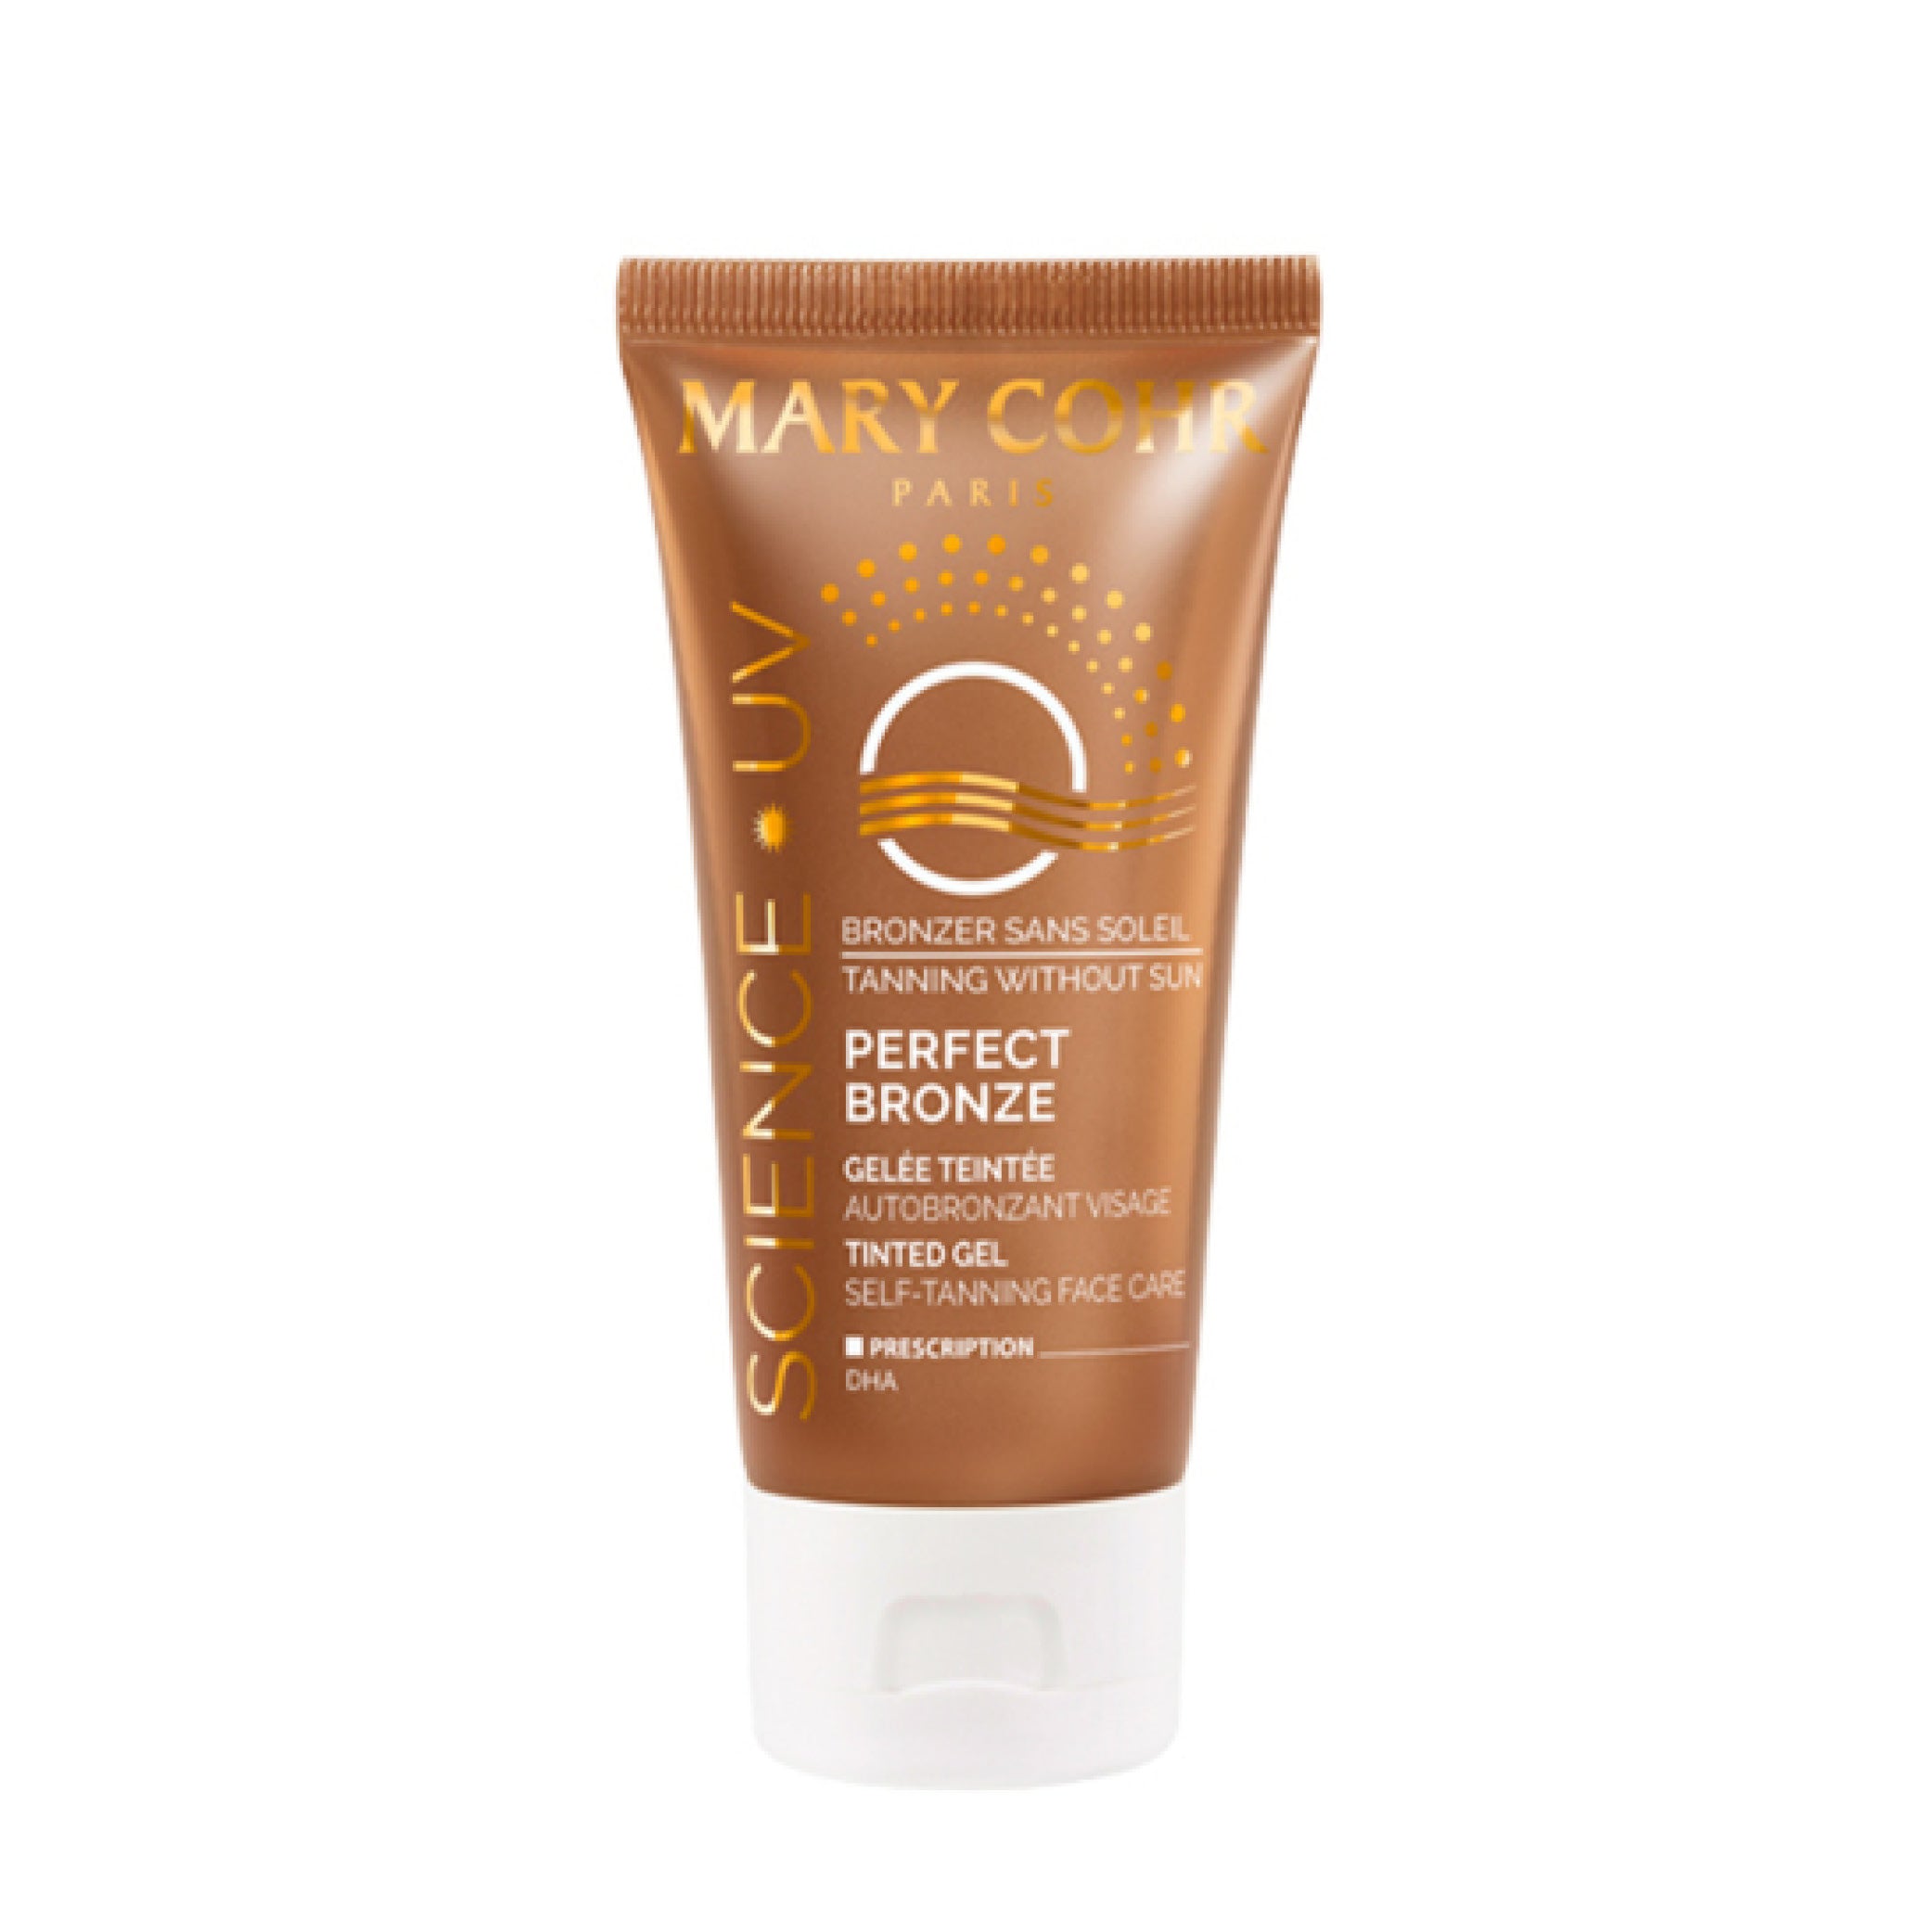 Tinted Gel Self-Tanning Face Care